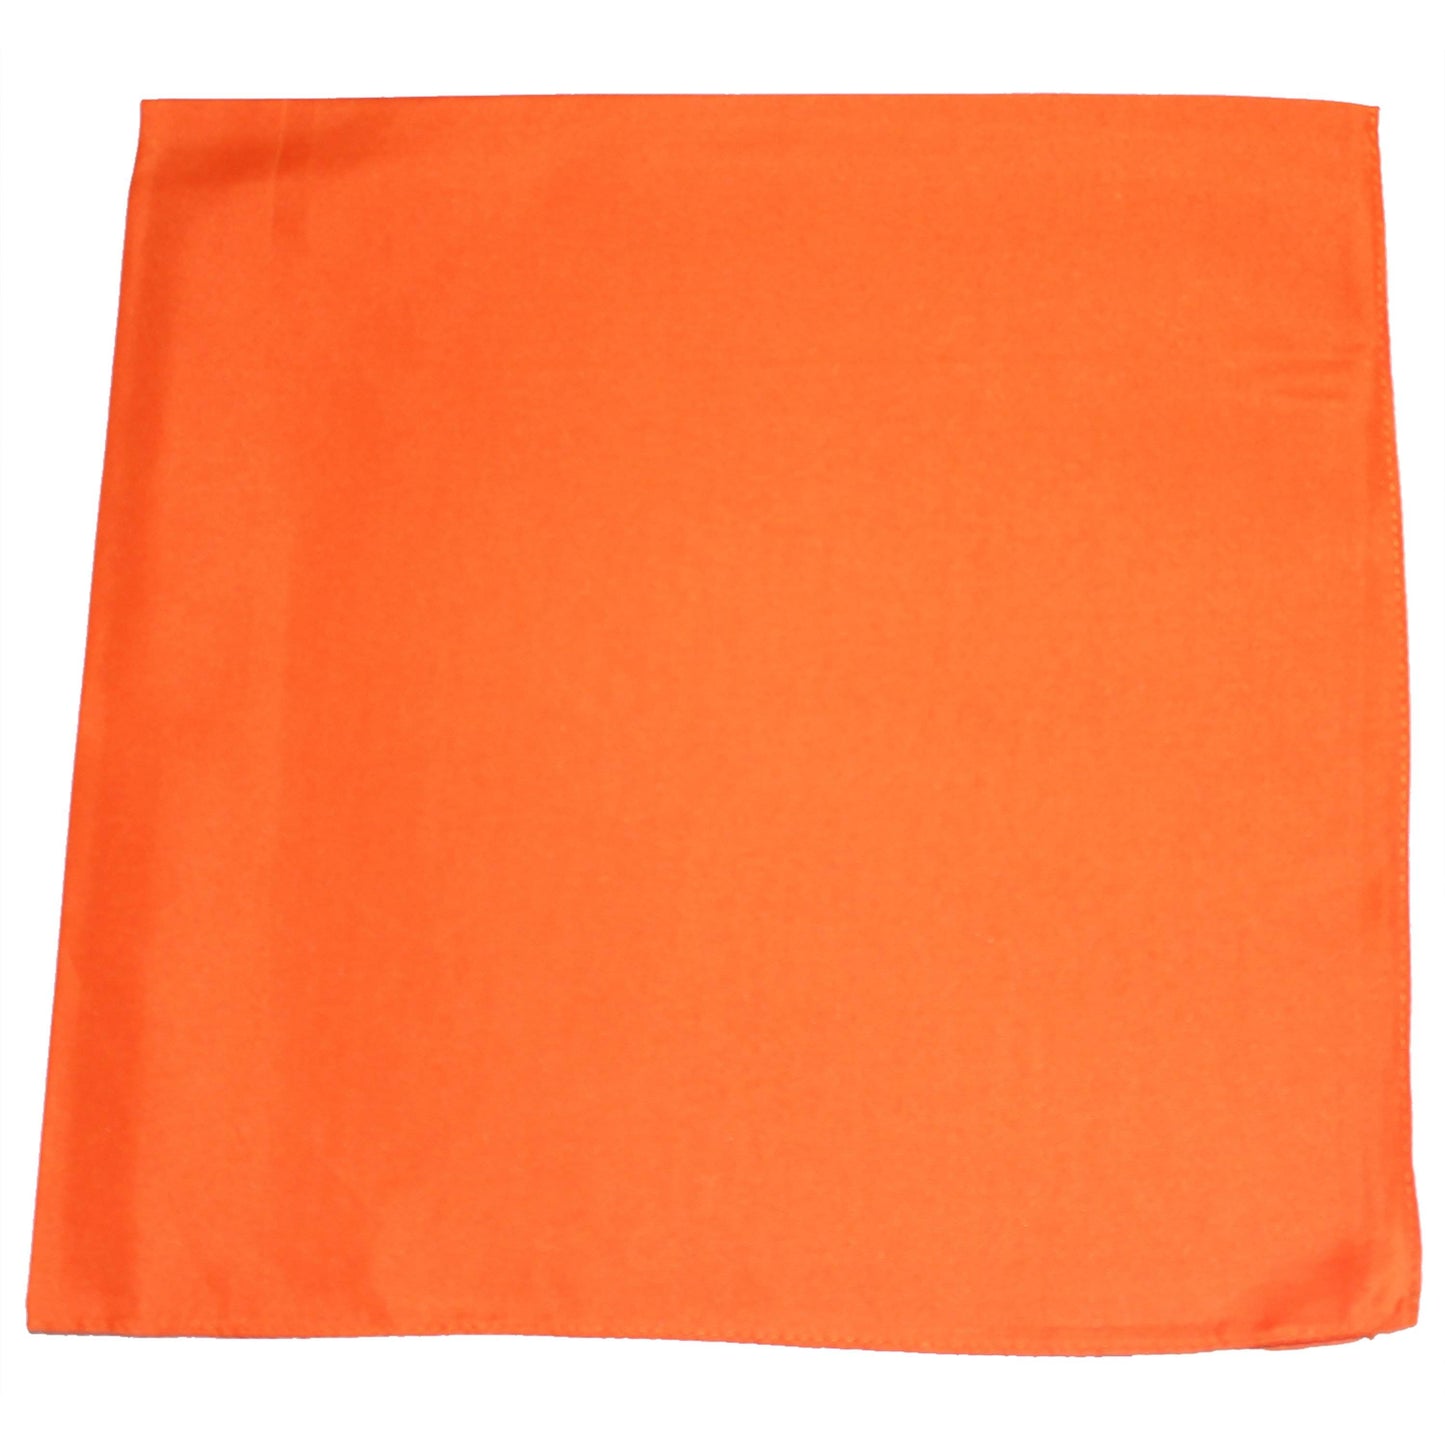 Pack of 2 Solid Cotton Extra Large Bandanas - 27 x 27 Inches / 68 x 68 cm